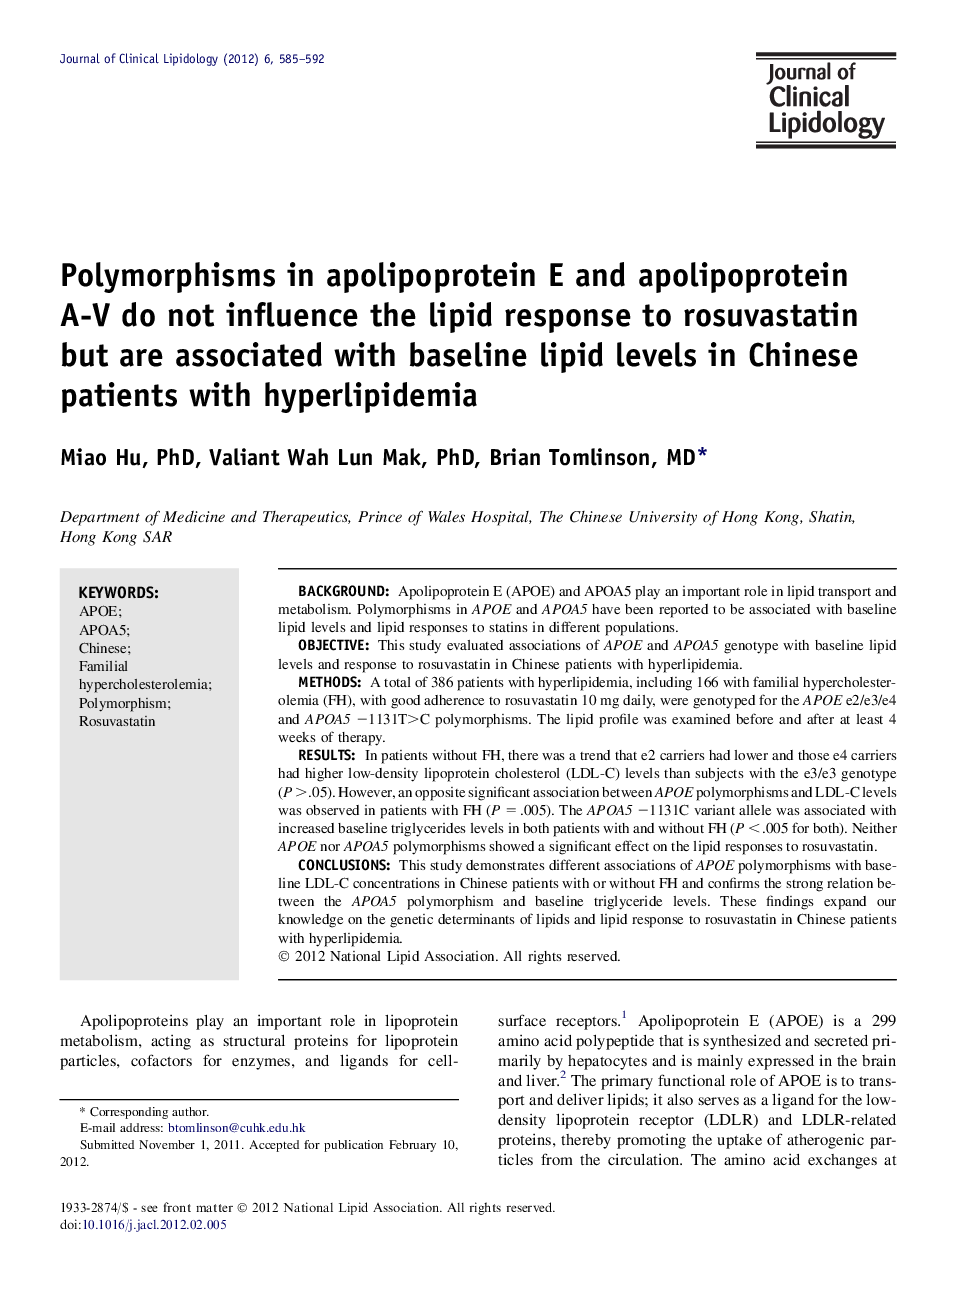 Polymorphisms in apolipoprotein E and apolipoprotein A-V do not influence the lipid response to rosuvastatin but are associated with baseline lipid levels in Chinese patients with hyperlipidemia